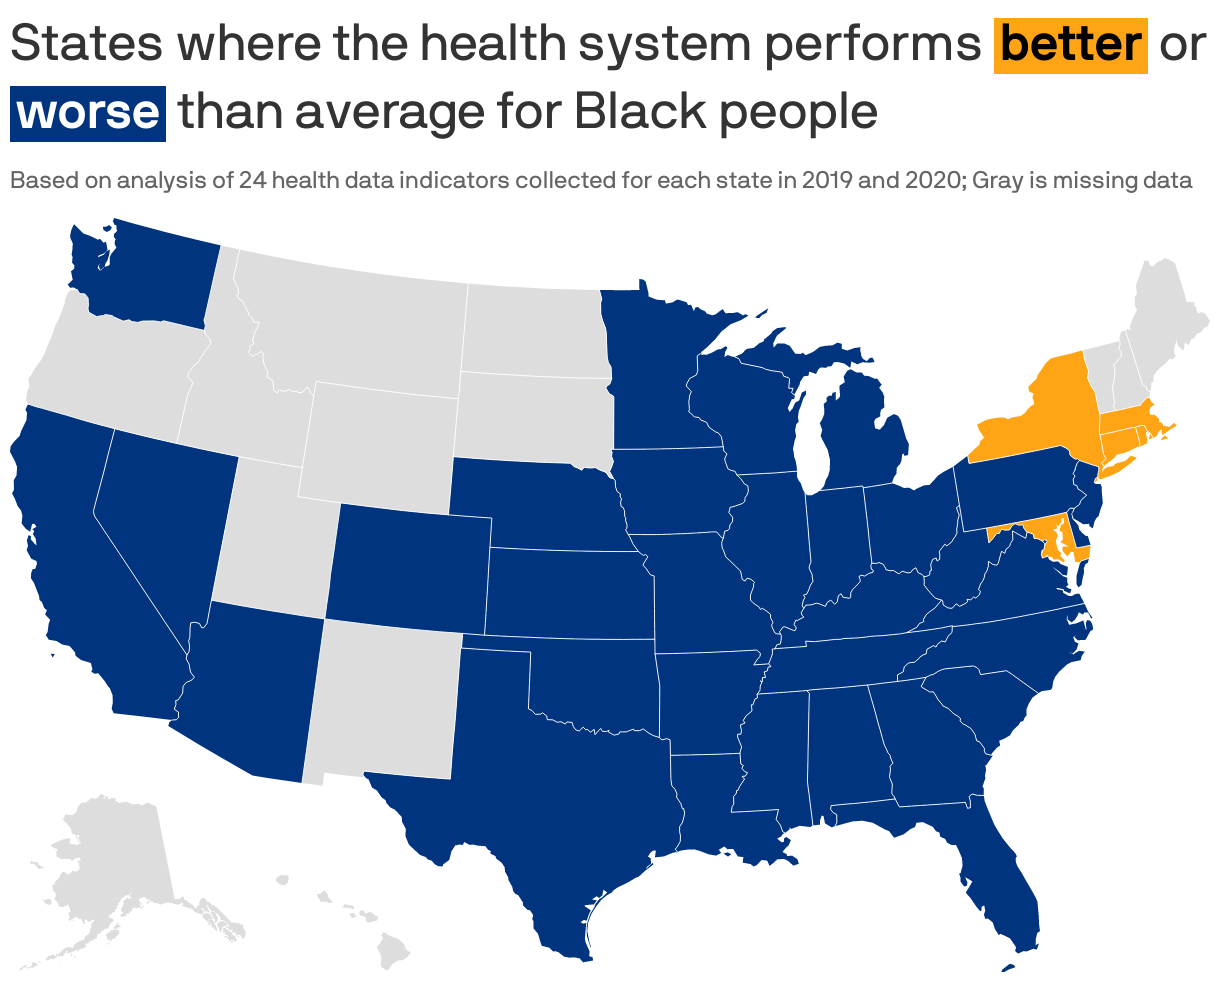 States where the health system performs <b style='padding: 0px 3px 2px 3px; background-color: #ffa515; color: black;'>better</b> or <b style='padding: 0px 3px 2px 3px; background-color: #00347f; color: white;'>worse</b> than average for Black people